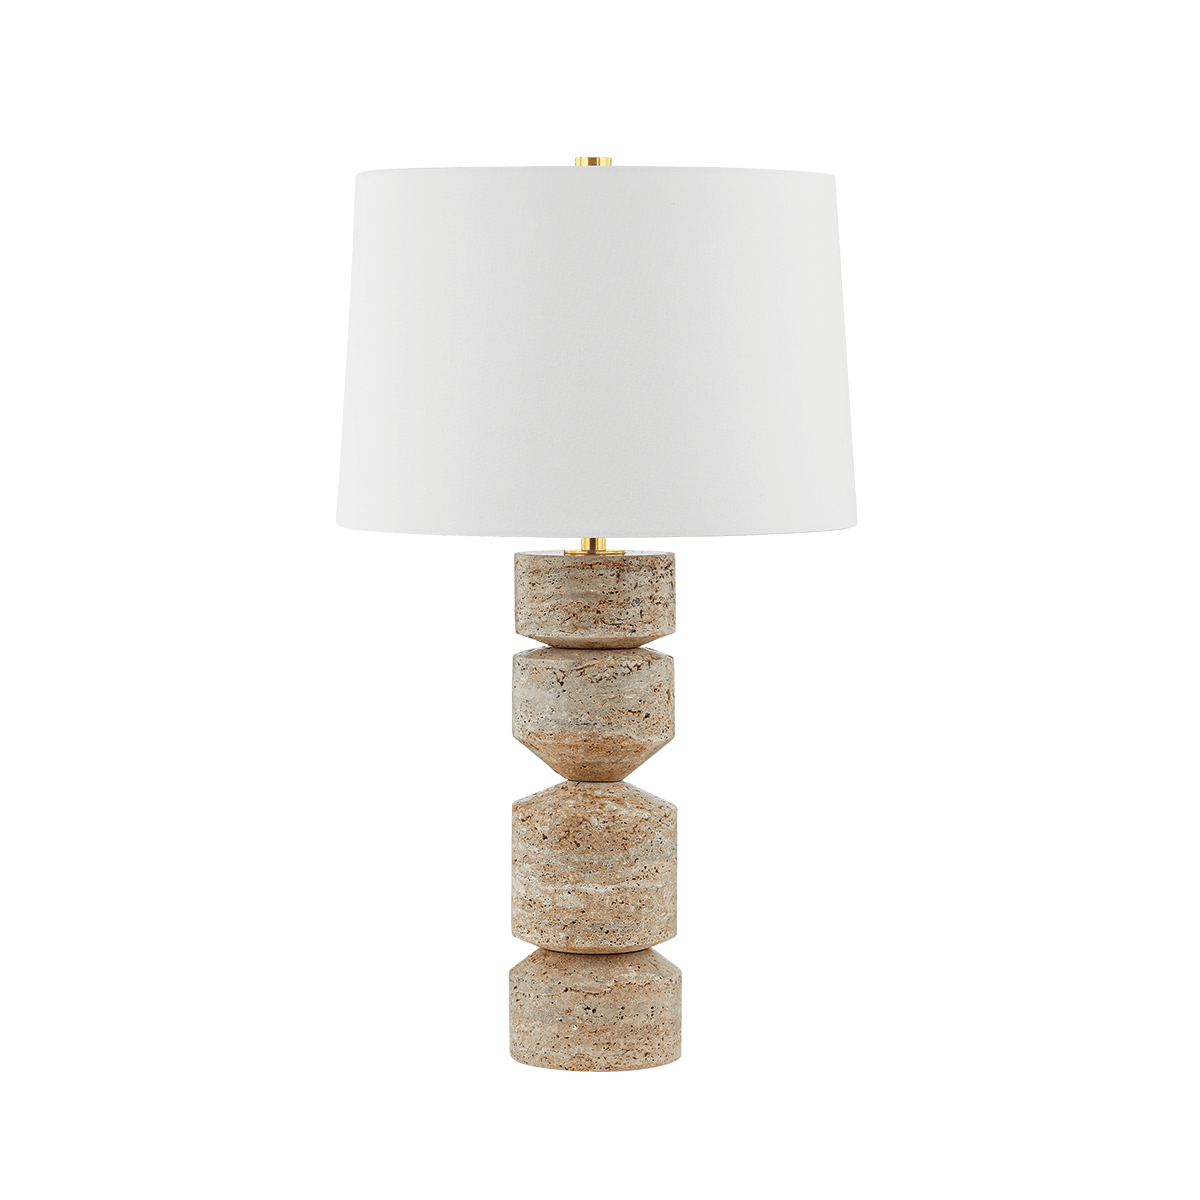 Hudson Valley Lighting - Galeville Table Lamp - L4730-AGB | Montreal Lighting & Hardware